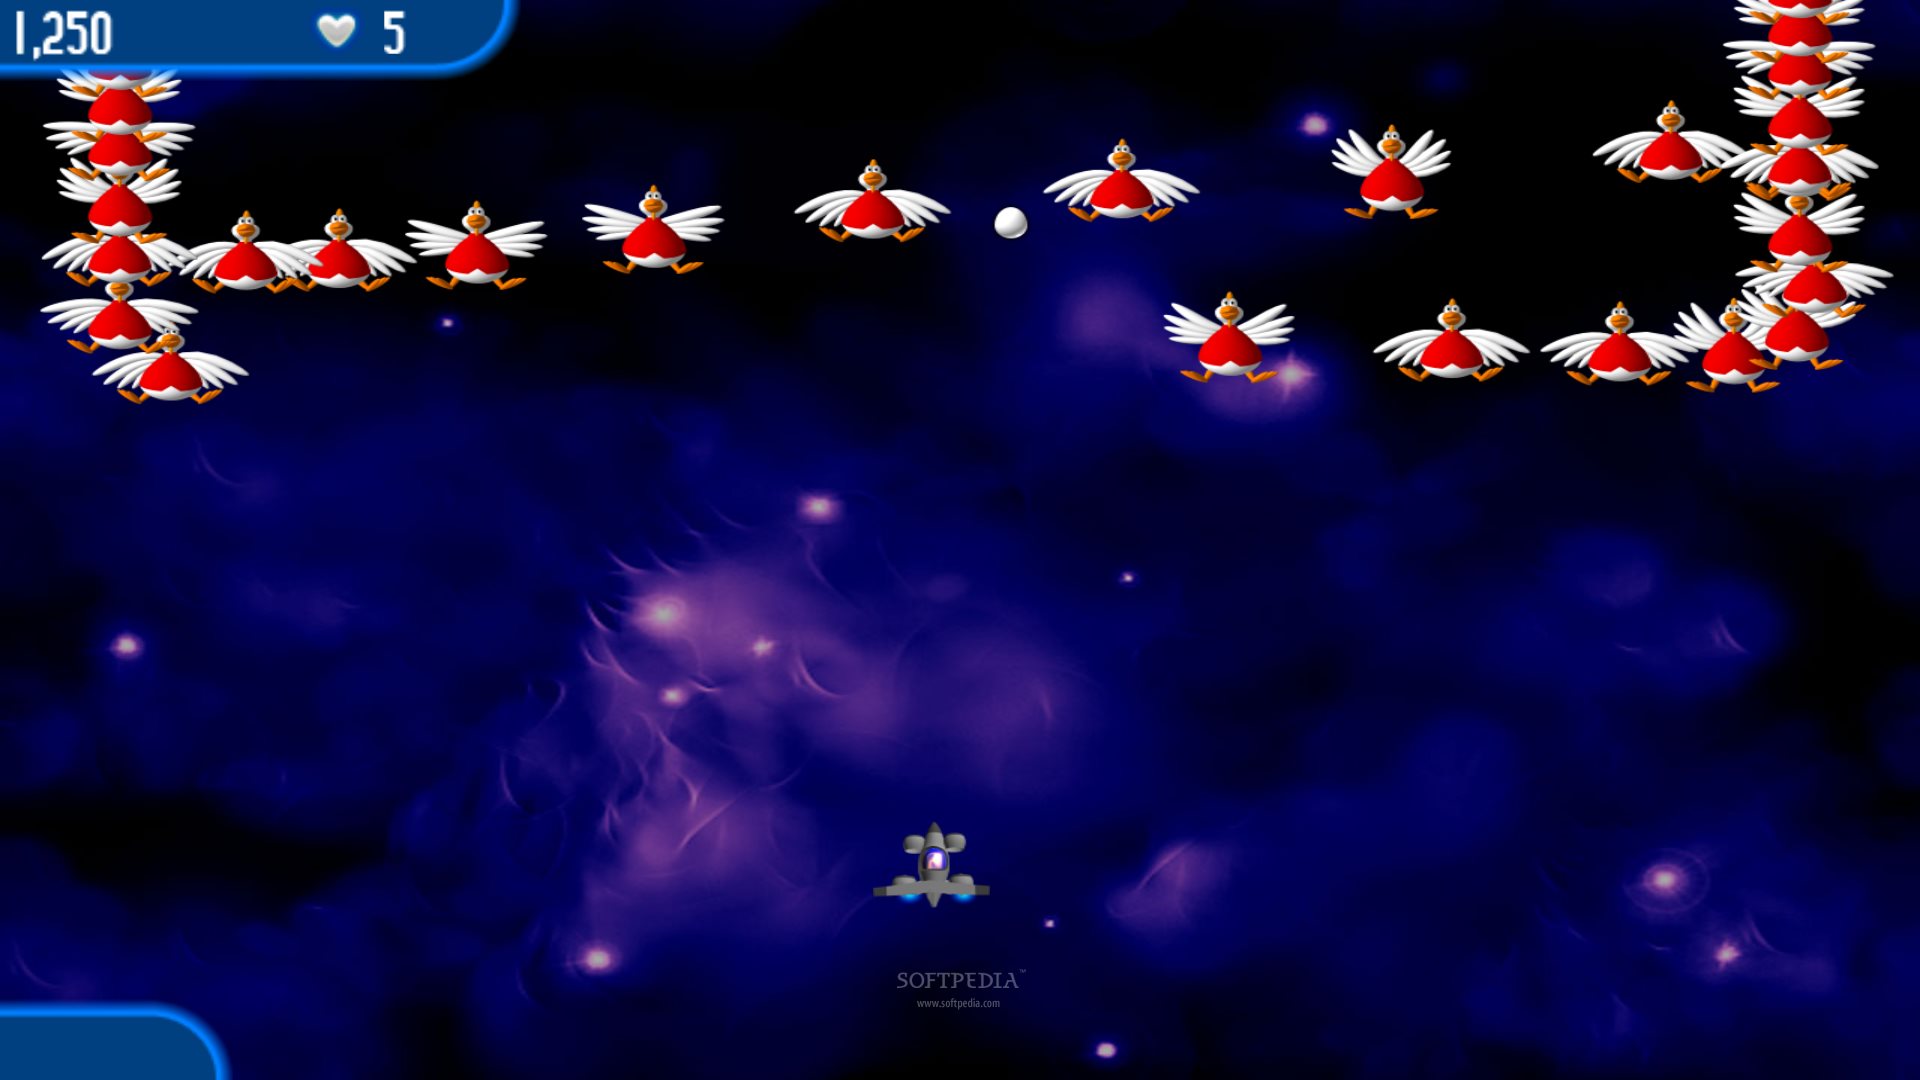 chicken invaders 2 for windows 7